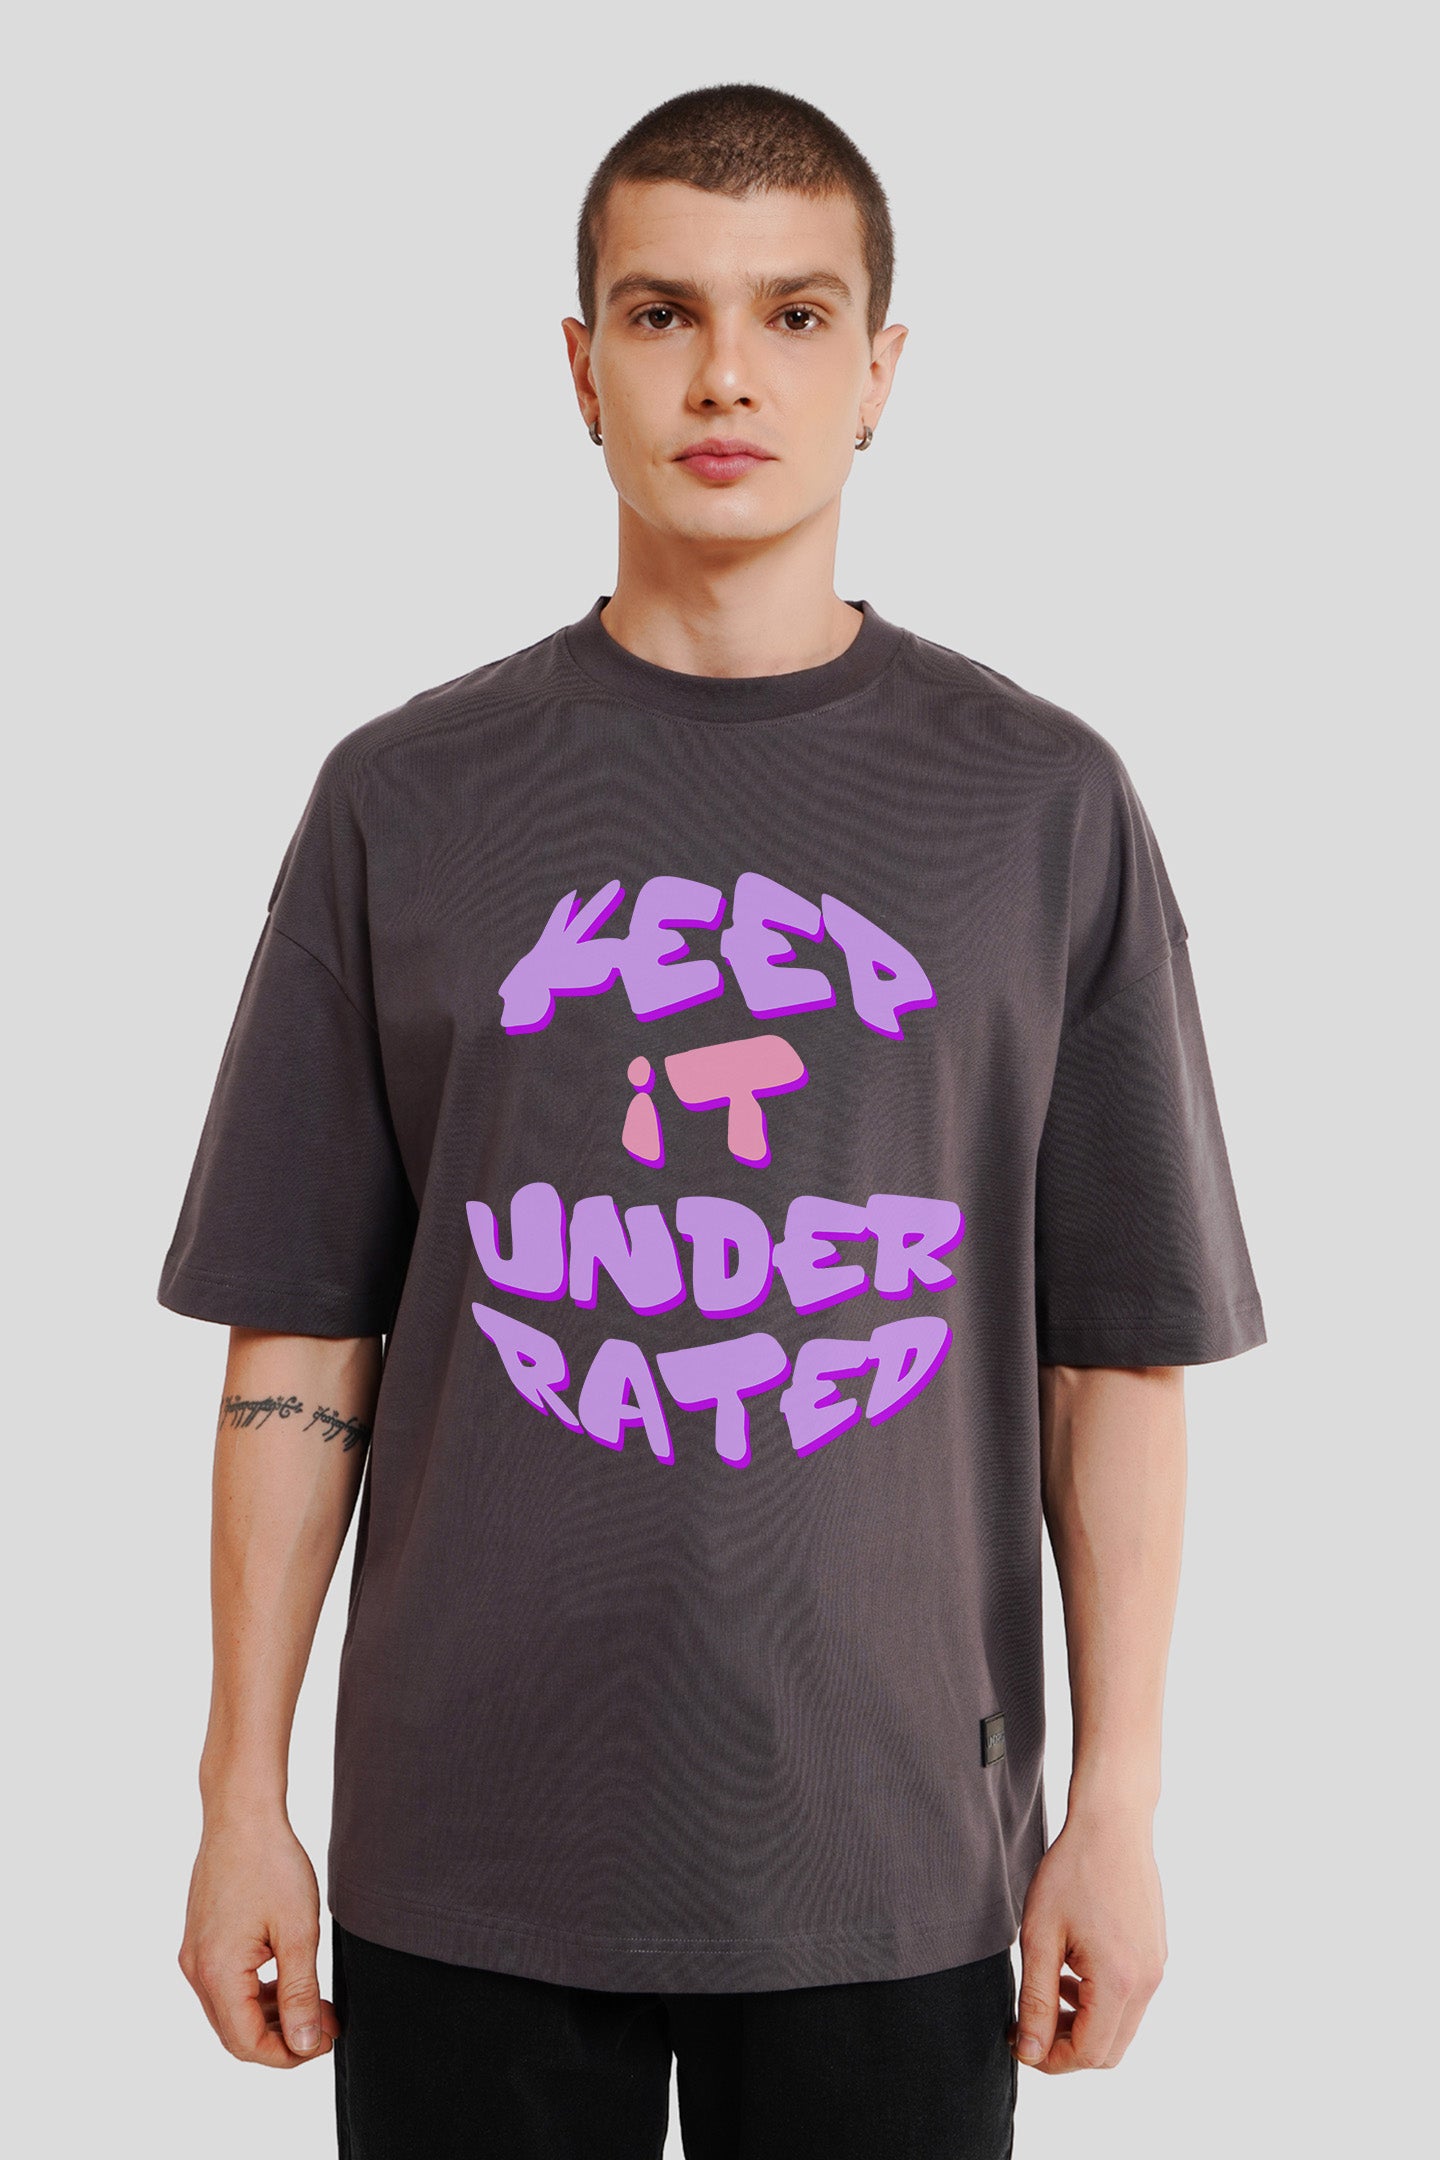 Keep It Underrated Dark Grey Printed T Shirt Men Baggy Fit With Front Design Pic 1